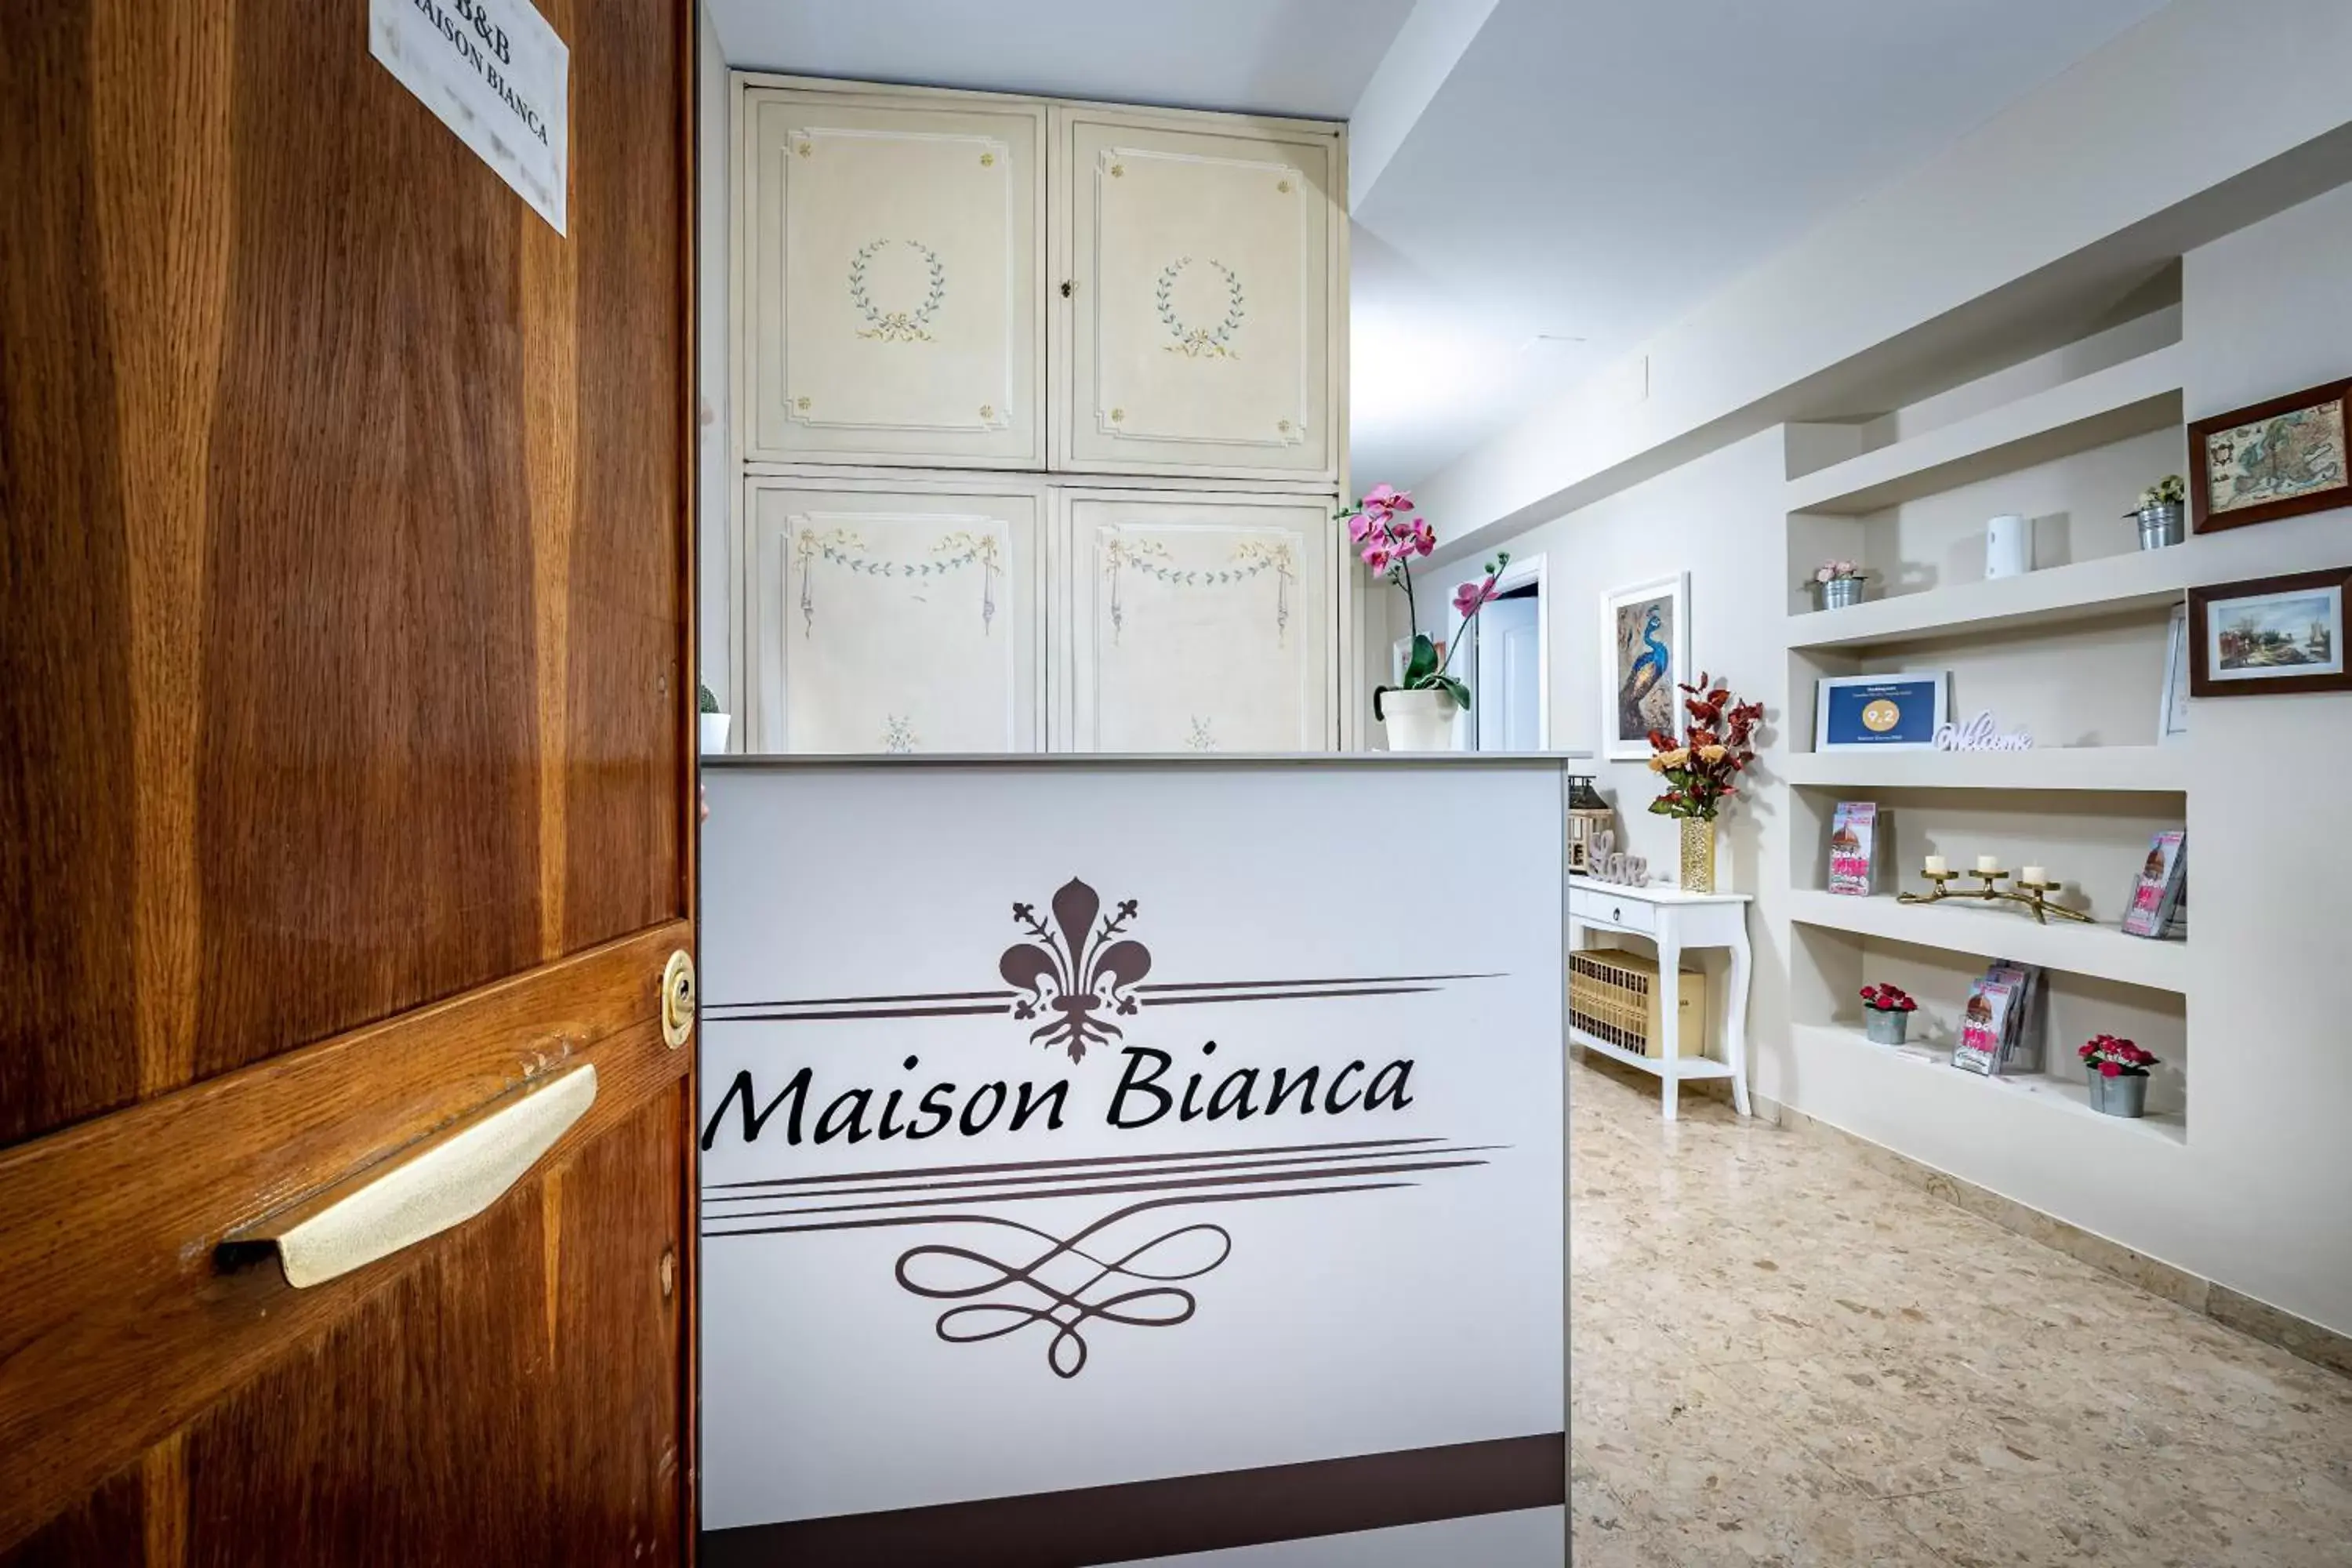 Property logo or sign in Maison Bianca B&B